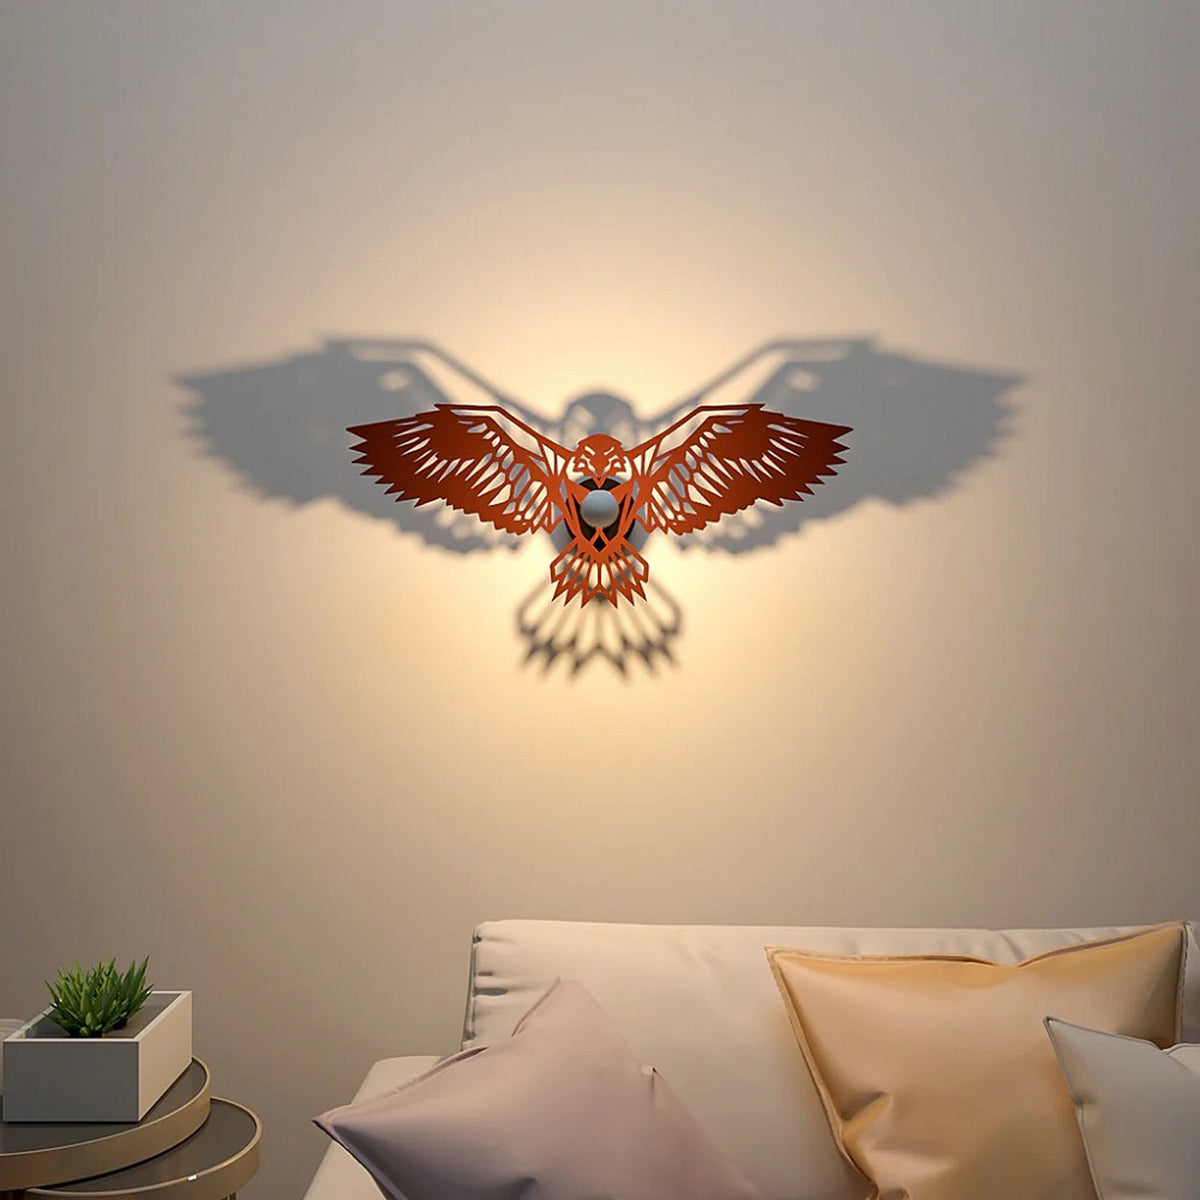 Mighty Eagle shadow lamp For Home / Office Wall decor